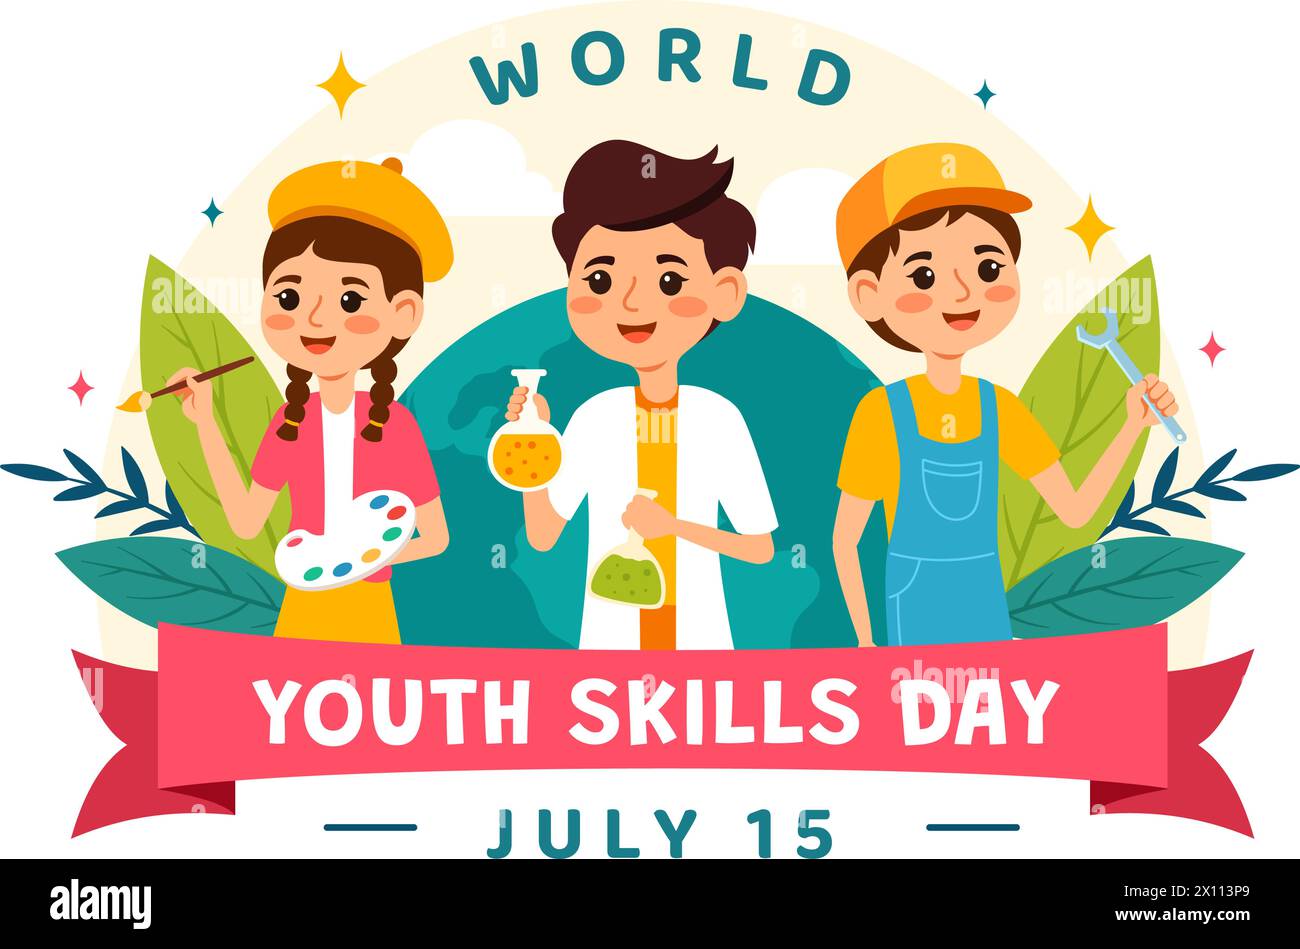 World Youth Skills Day Vector Illustration of People with Skills for Various Employment and Entrepreneurship in Flat Kids Cartoon Background Design Stock Vector